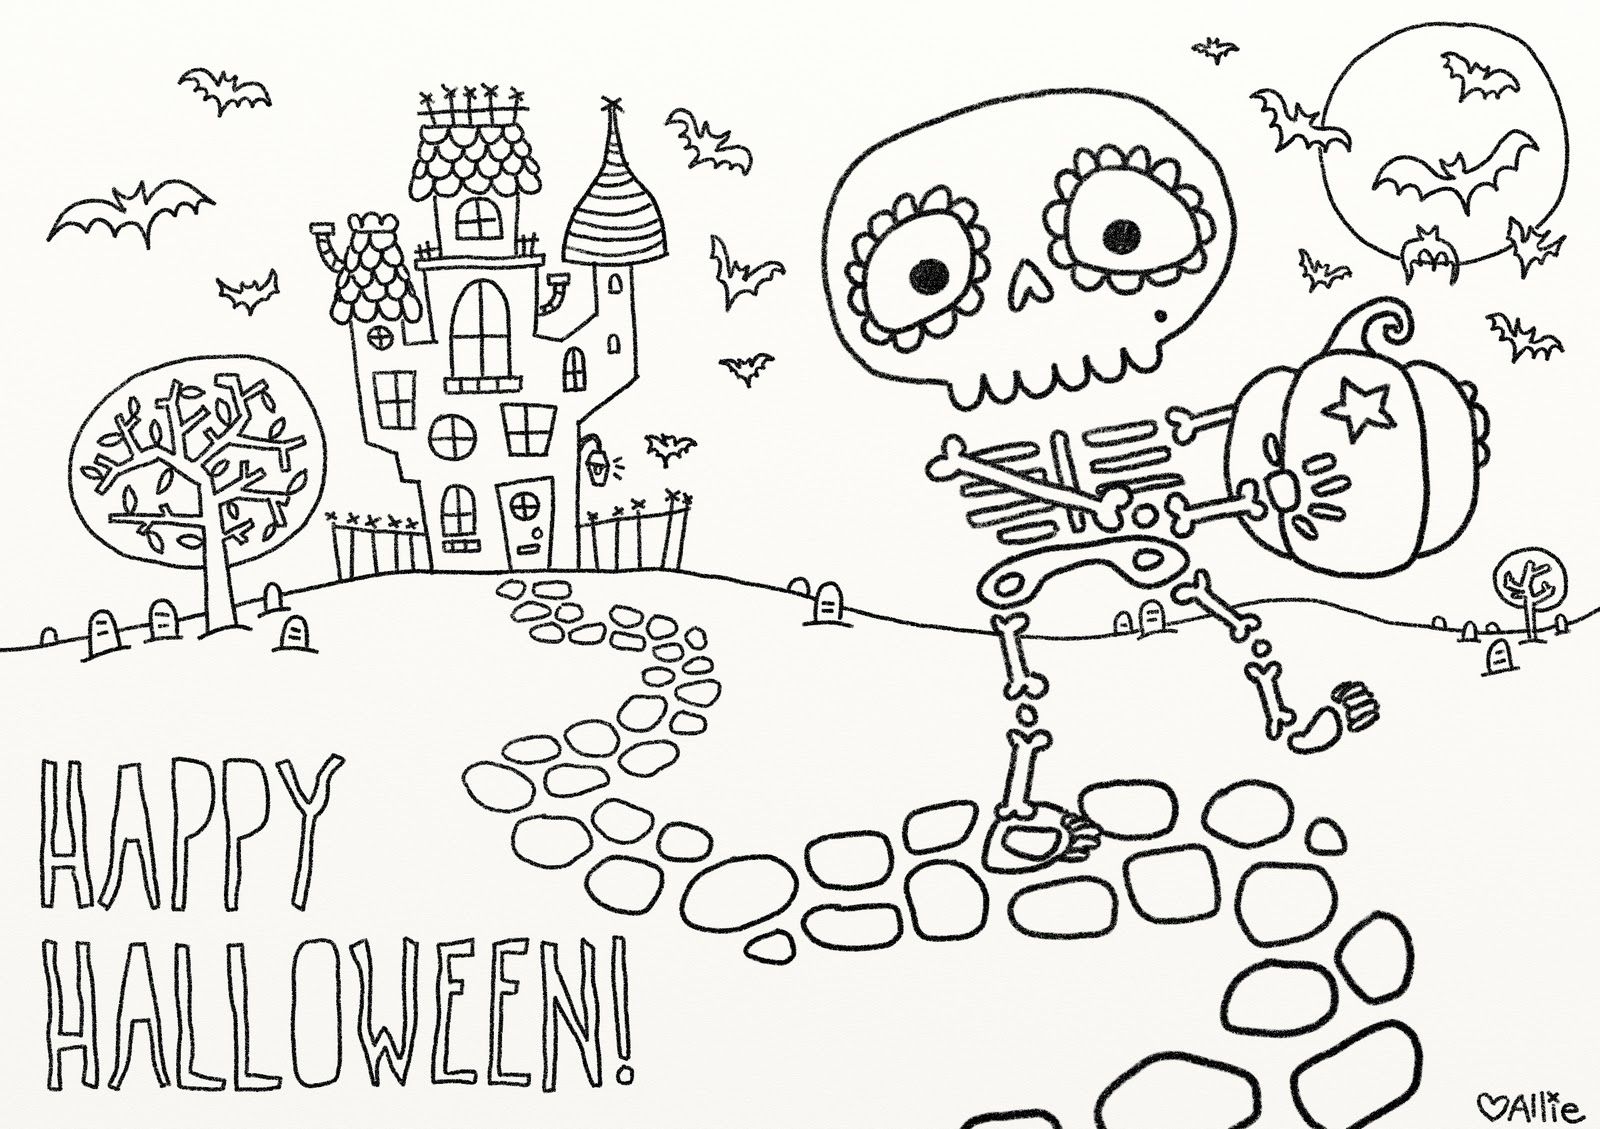 9 fun free printable Halloween coloring pages